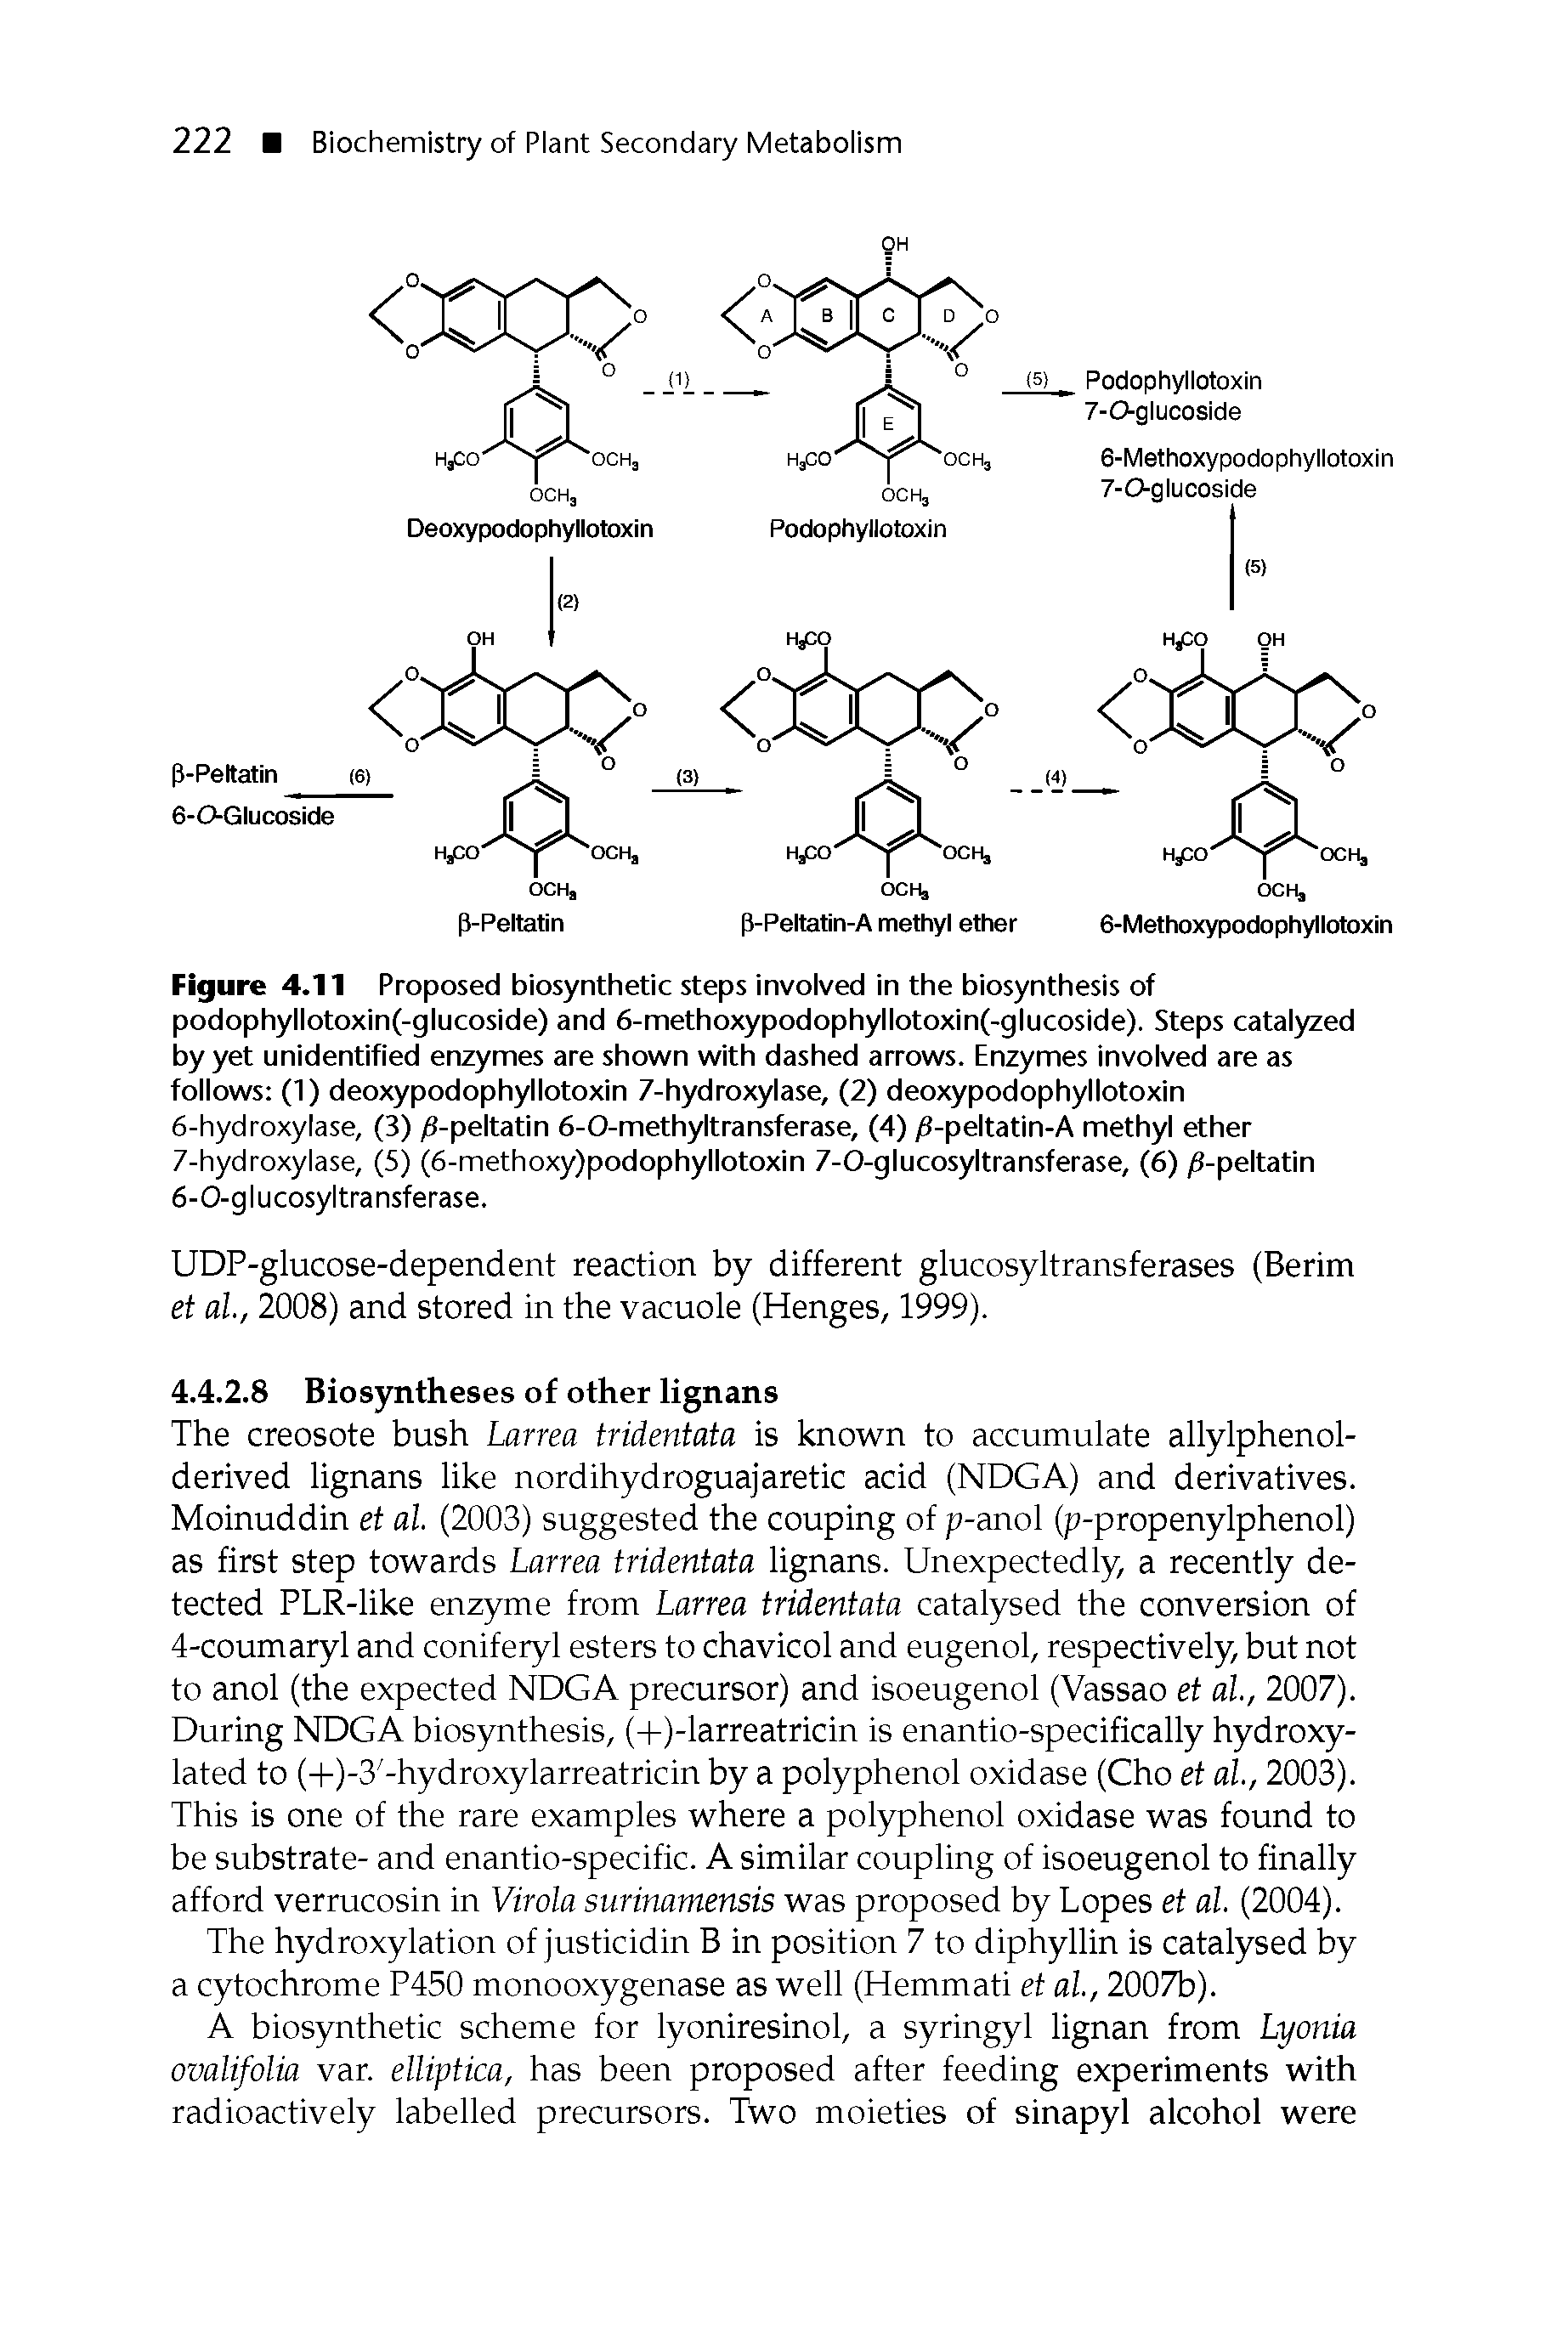 Figure 4.11 Proposed biosynthetic steps involved in the biosynthesis of podophyllotoxin(-glucoside) and 6-methoxypodophyllotoxin(-glucoside). Steps catalyzed by yet unidentified enzymes are shown with dashed arrows. Enzymes involved are as follows (1) deoxypodophyllotoxin 7-hydroxylase, (2) deoxypodophyllotoxin...